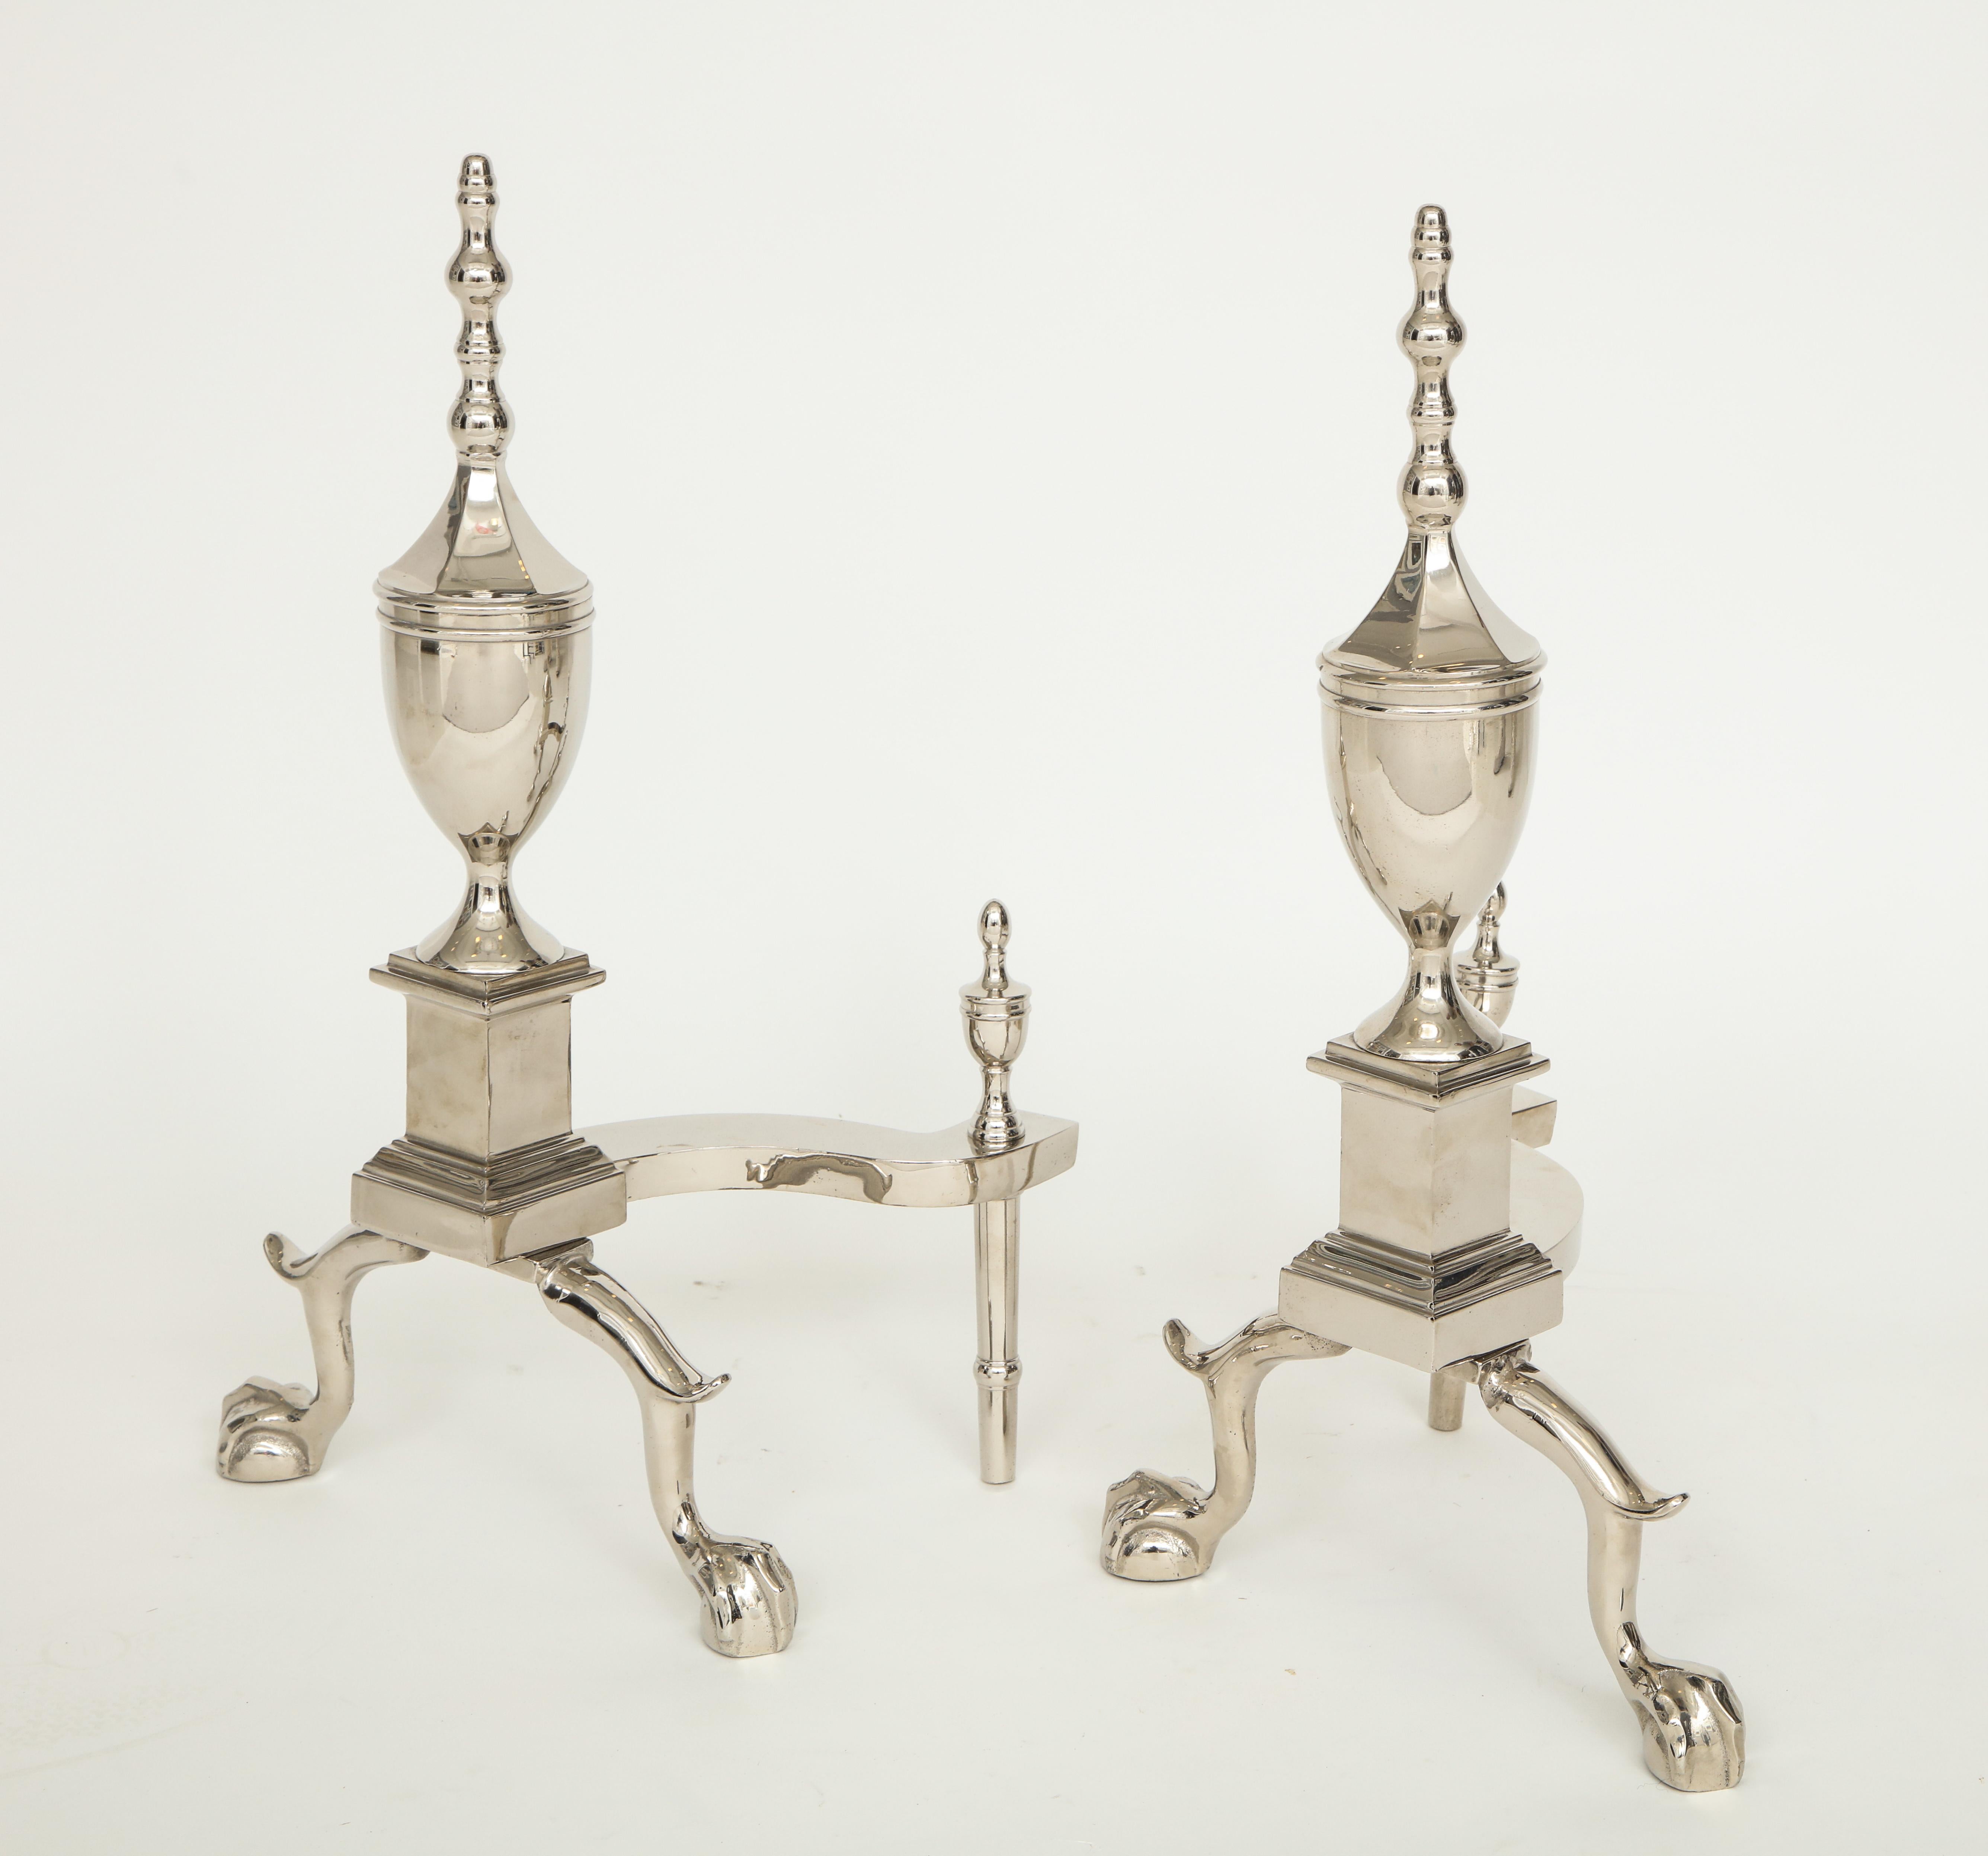 Pair of Art Deco polished nickel andirons featuring classical urn shaped body, claw with ball feet and topped by a spire finials.